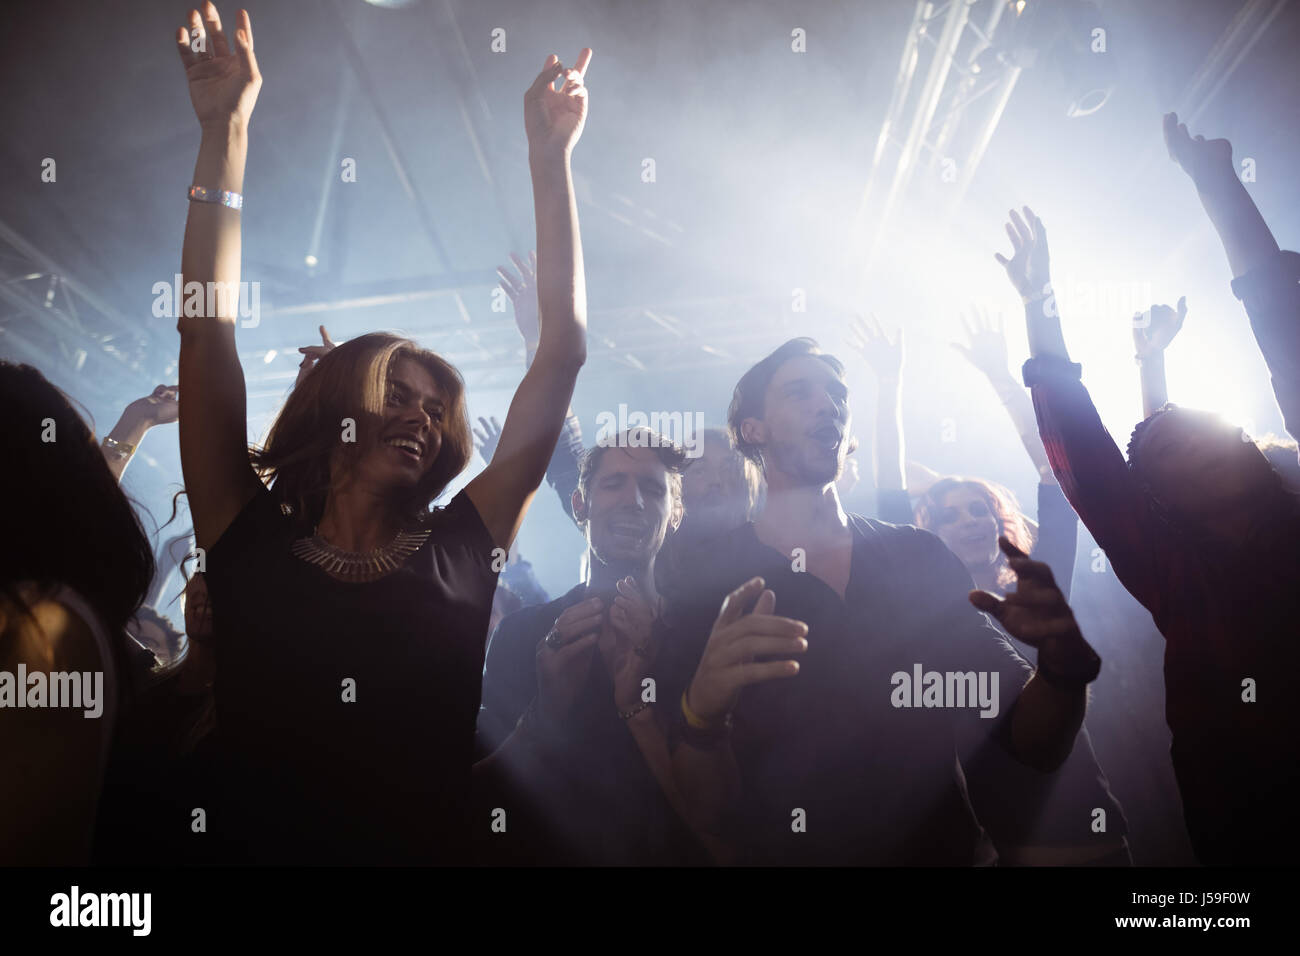 Low angle view of happy people dancing at nightclub Stock Photo